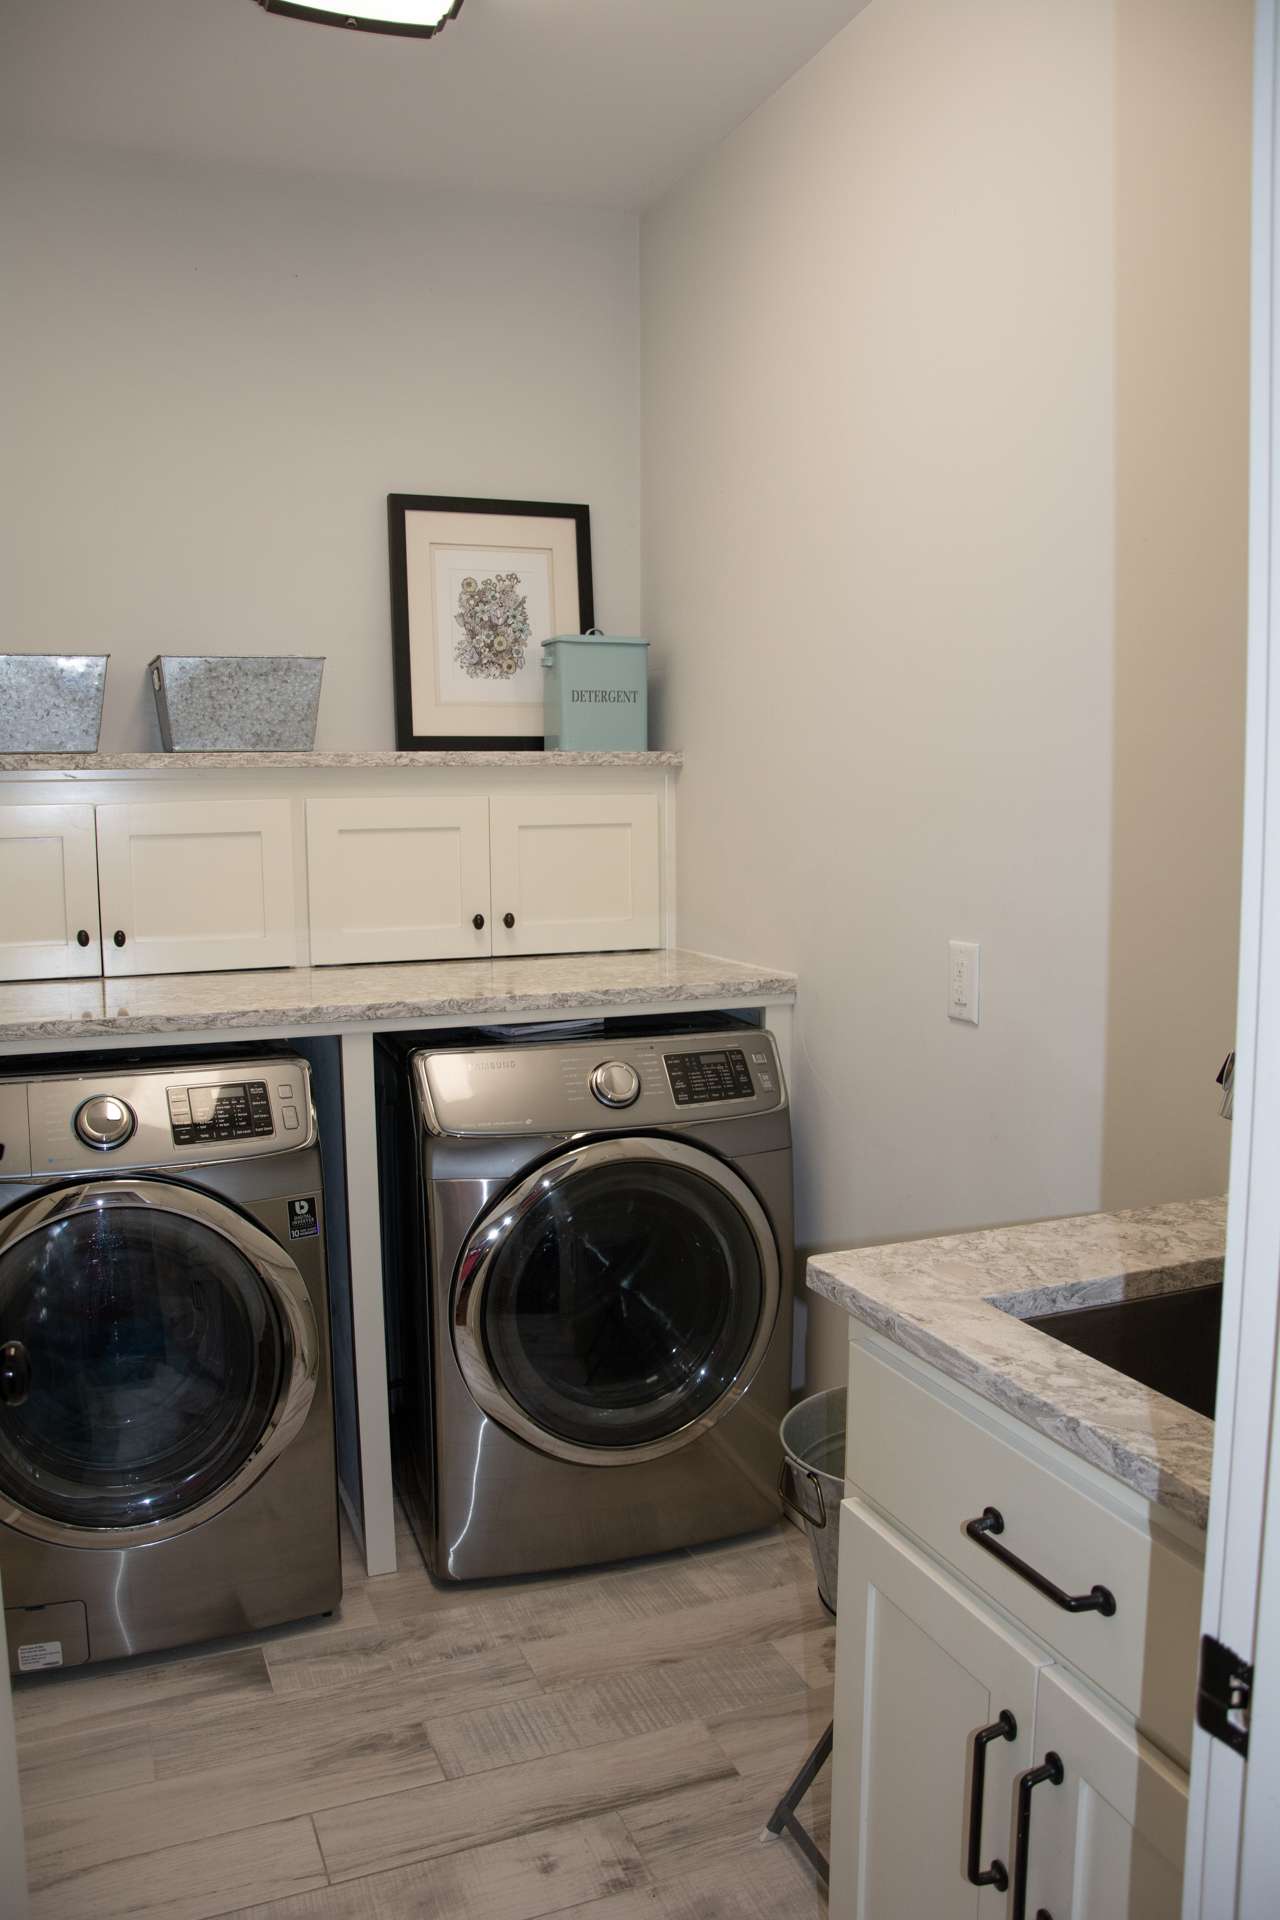 The laundry room is located on the main floor and provides storage cabinetry and a full sink.